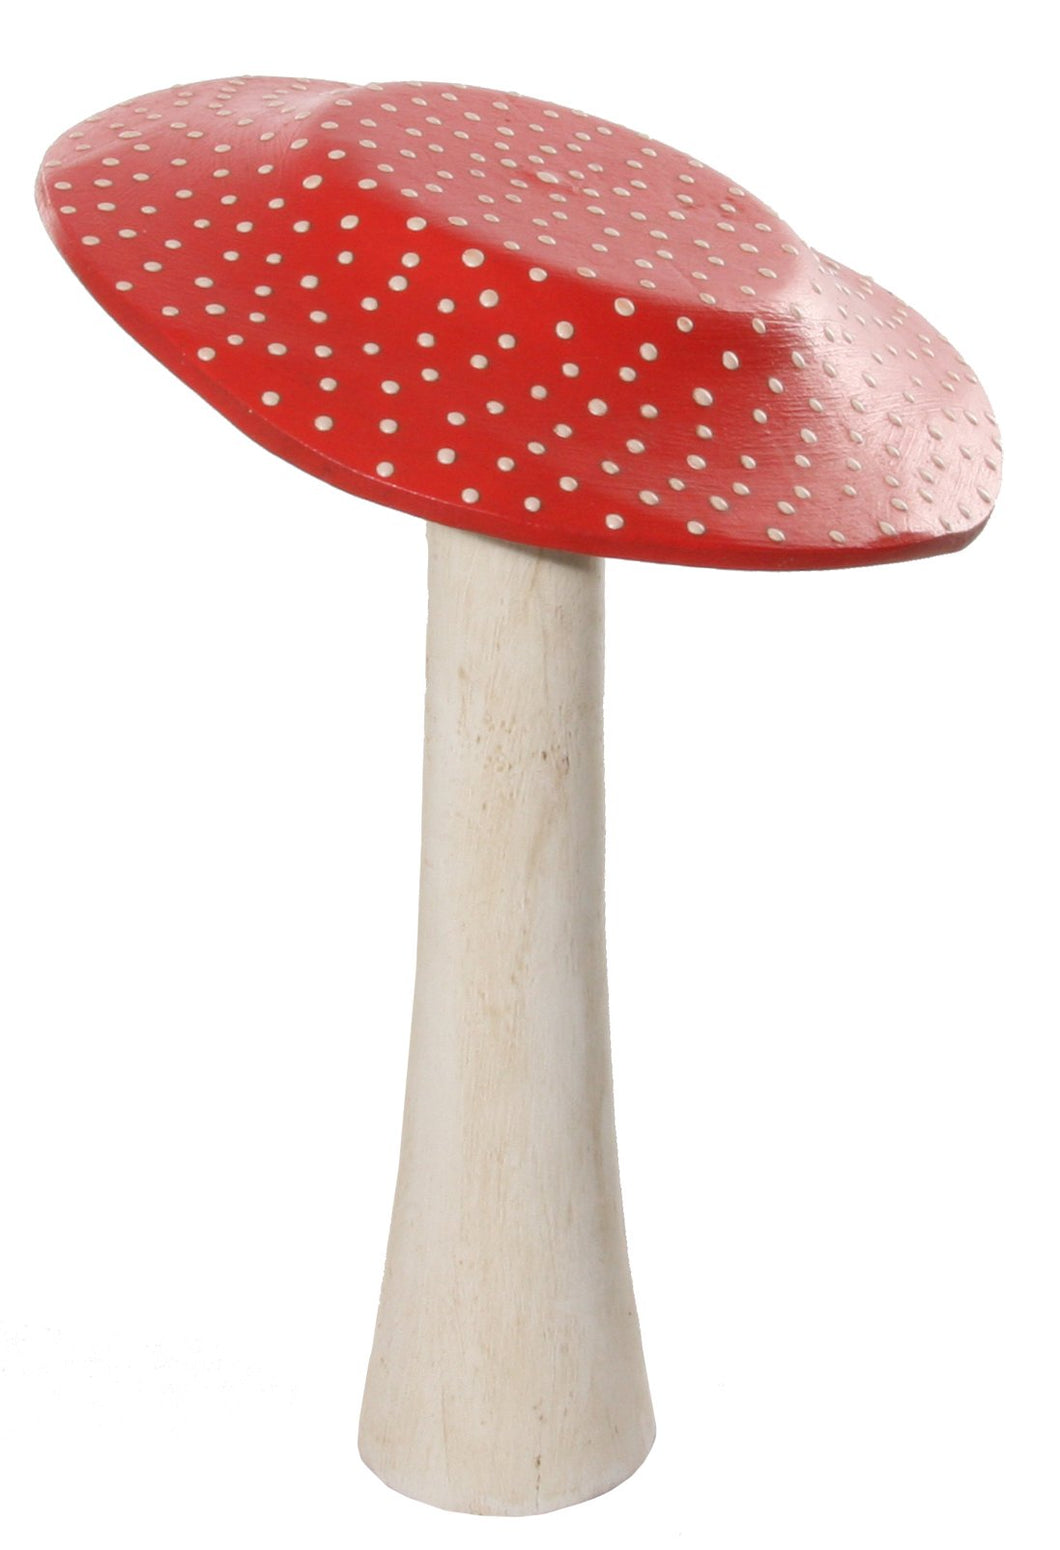 Wooden Mushroom - Red with White Dots 12